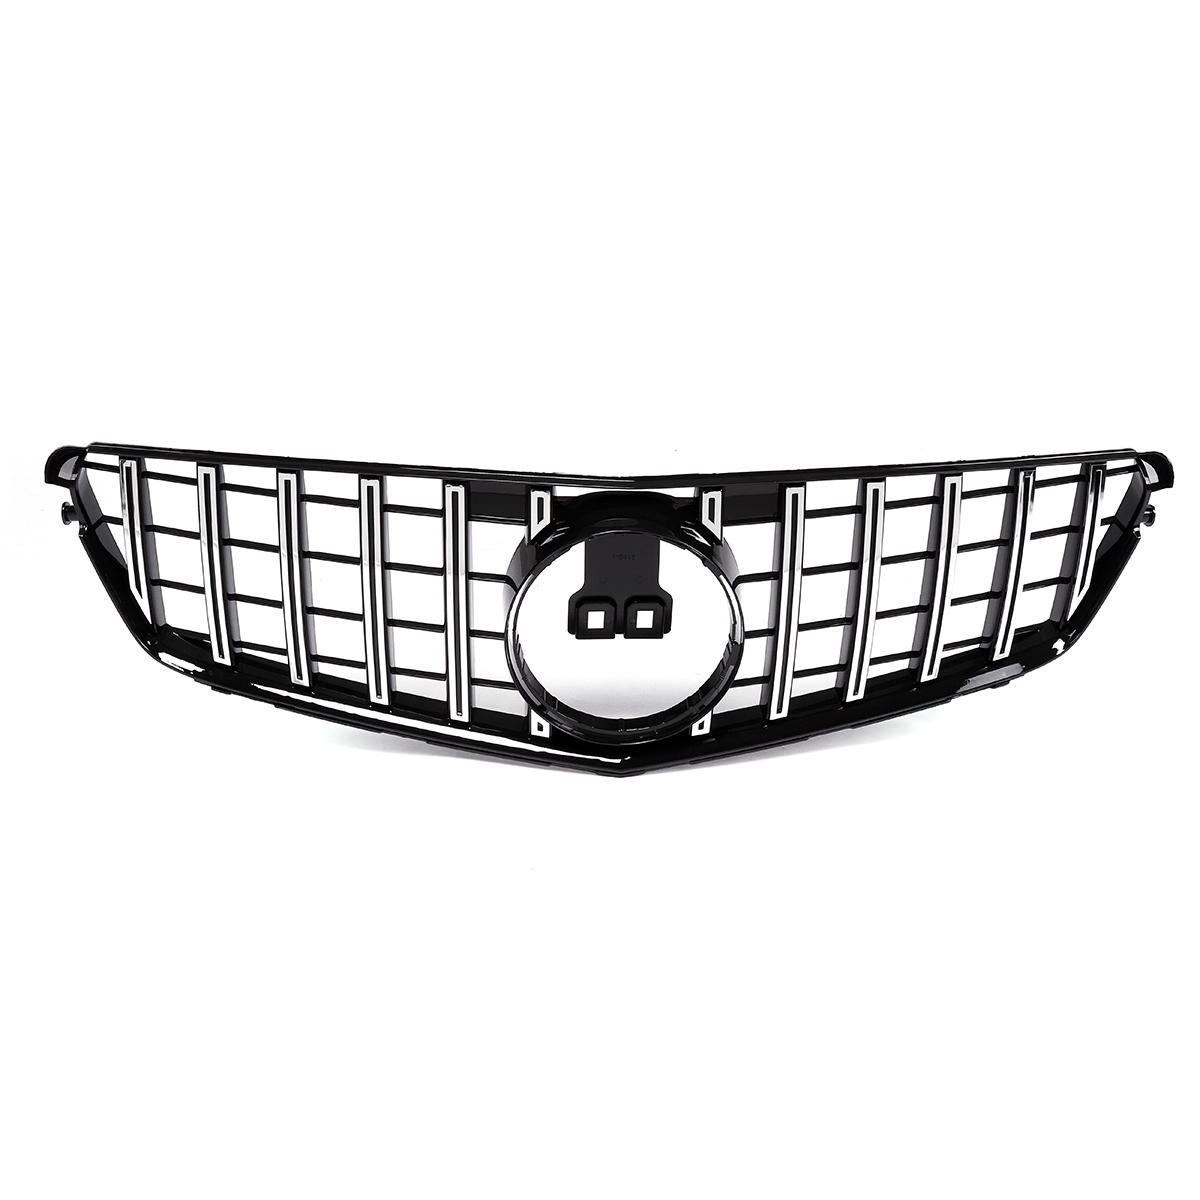 Image of Chrome Silver GT R AMG Style Front Grill Grille For 08-14 Mercedes Benz C-Class W204 C200 C300